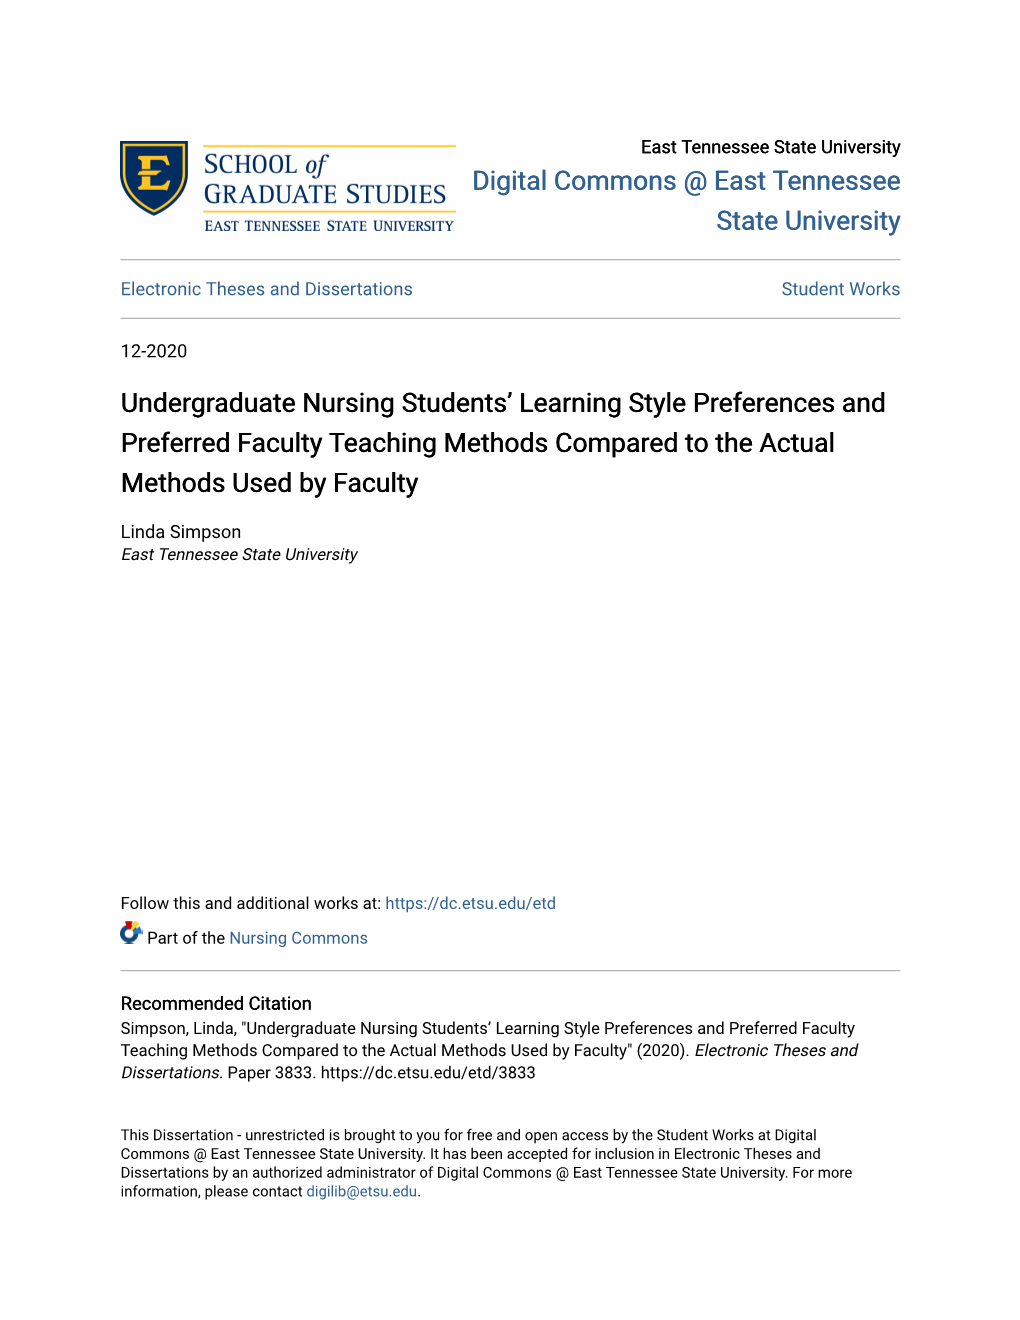 Undergraduate Nursing Students' Learning Style Preferences and Preferred Faculty Teaching Methods Compared to the Actual Metho